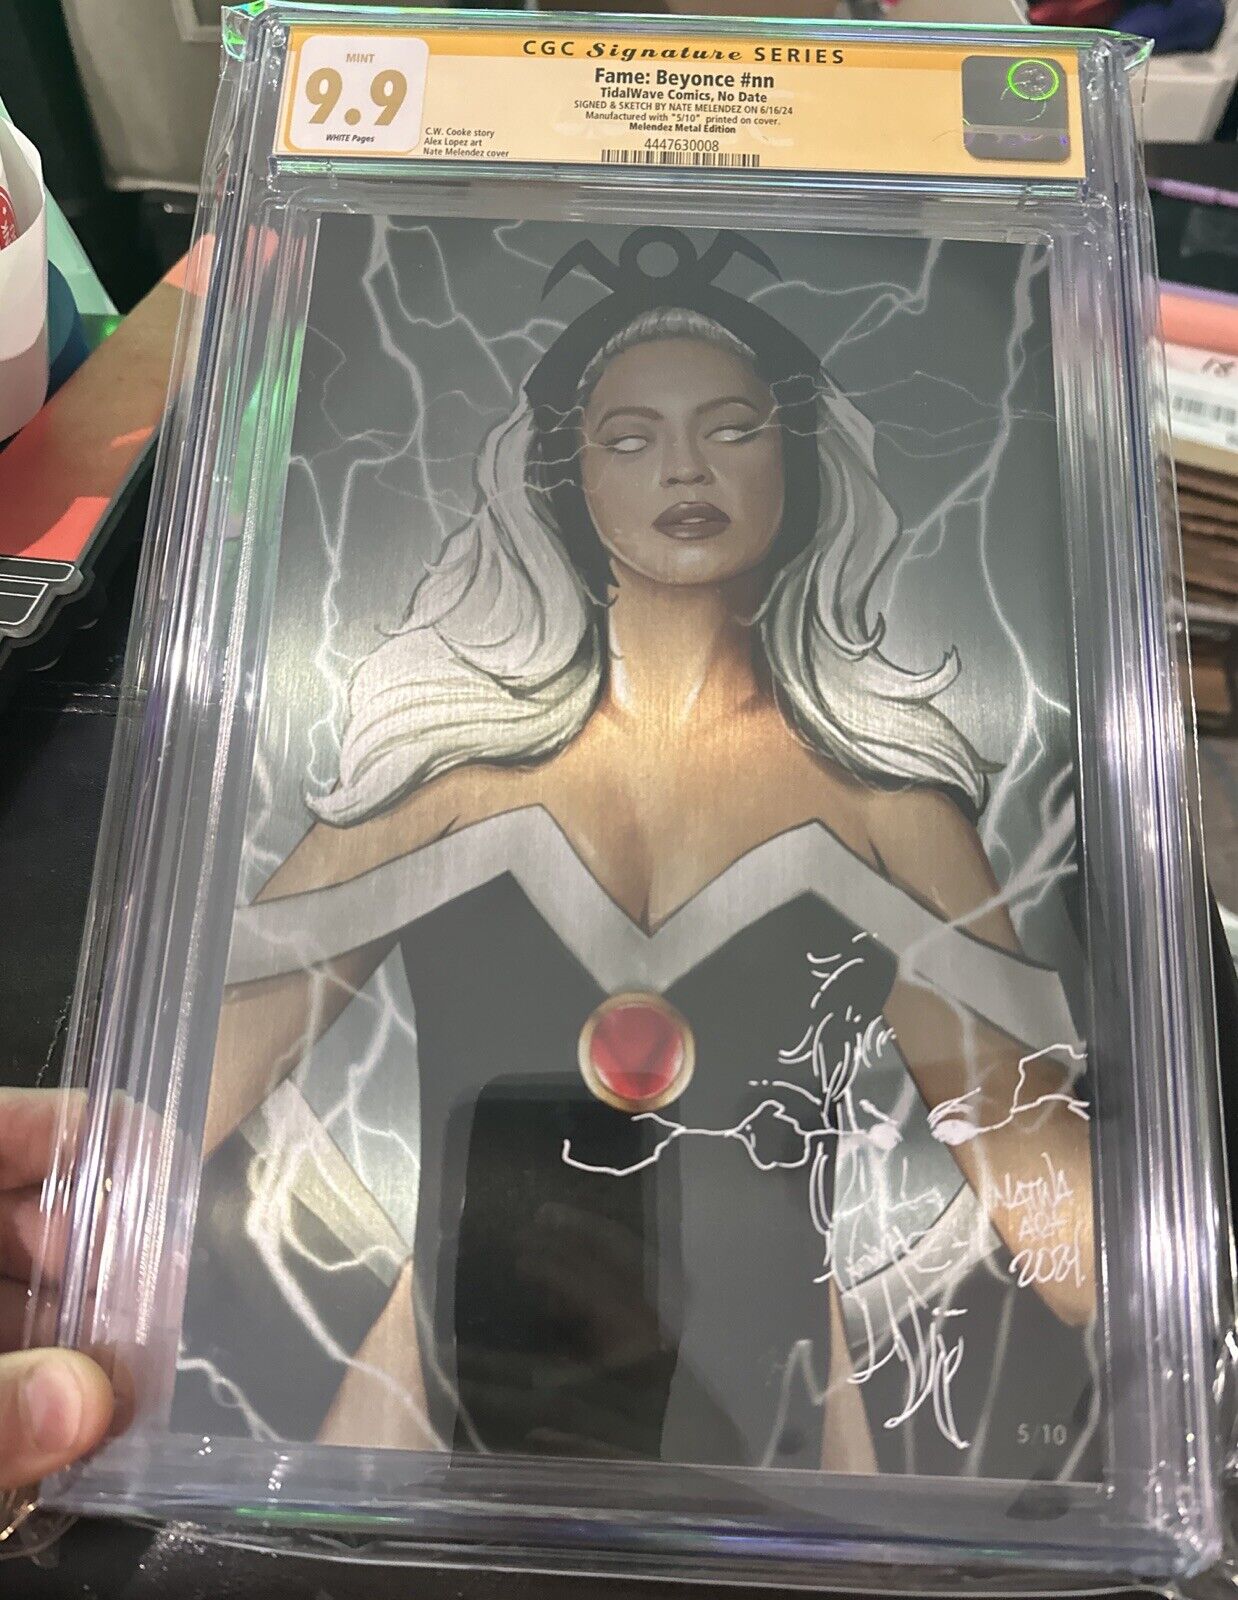 Fame: Beyonce METAL Cover- NATWA SIGNED & REMARQUED- Slab Imperfections-CGC 9.9